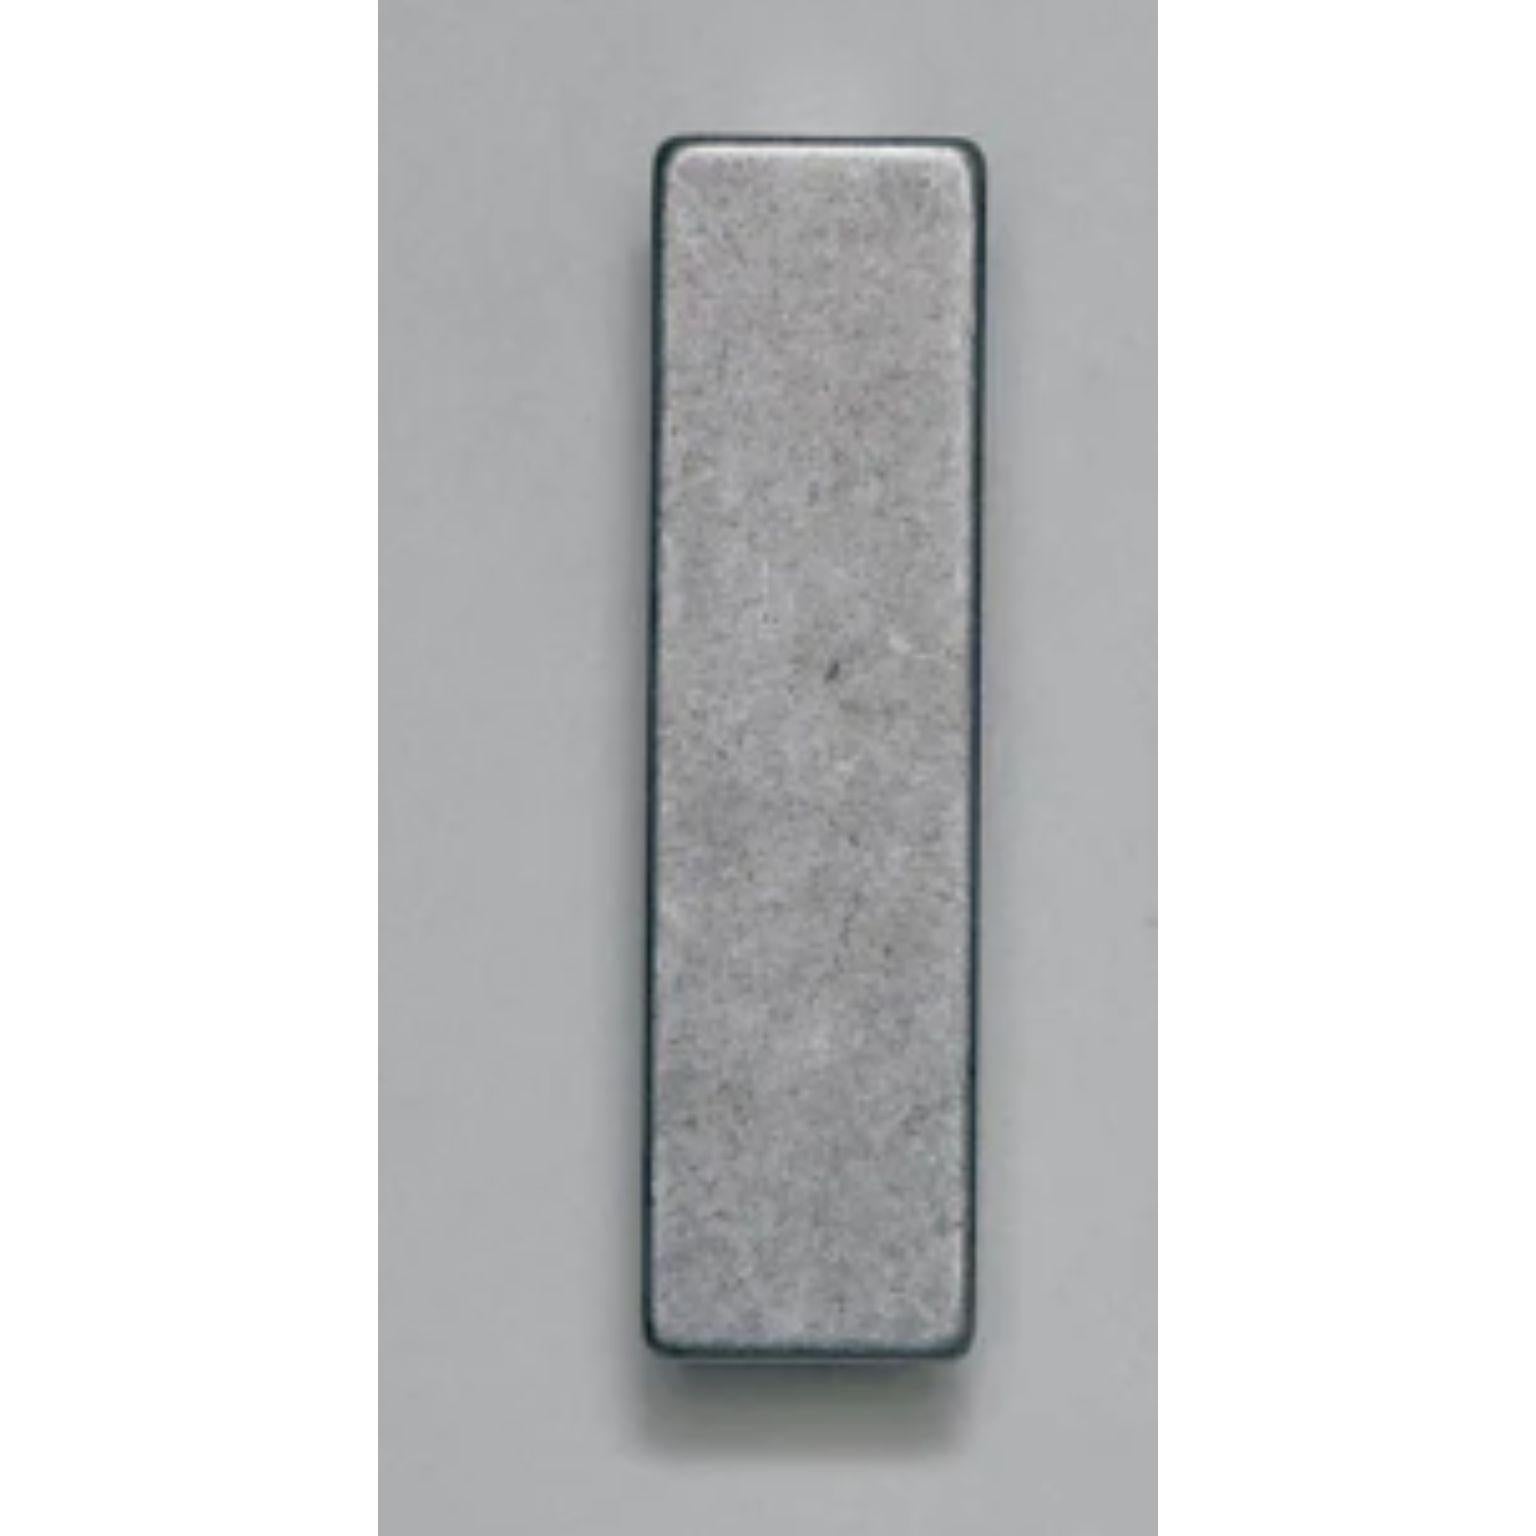 Aluminium Brute Handle by Henry Wilson
Dimensions: W 3 x D 2 x H 10 cm
Materials: Aluminum

This versatile handle can be used for cabinetry, sliding doors and sash windows. 
Each piece is sand cast and rumbled finished.
Brute Handles are